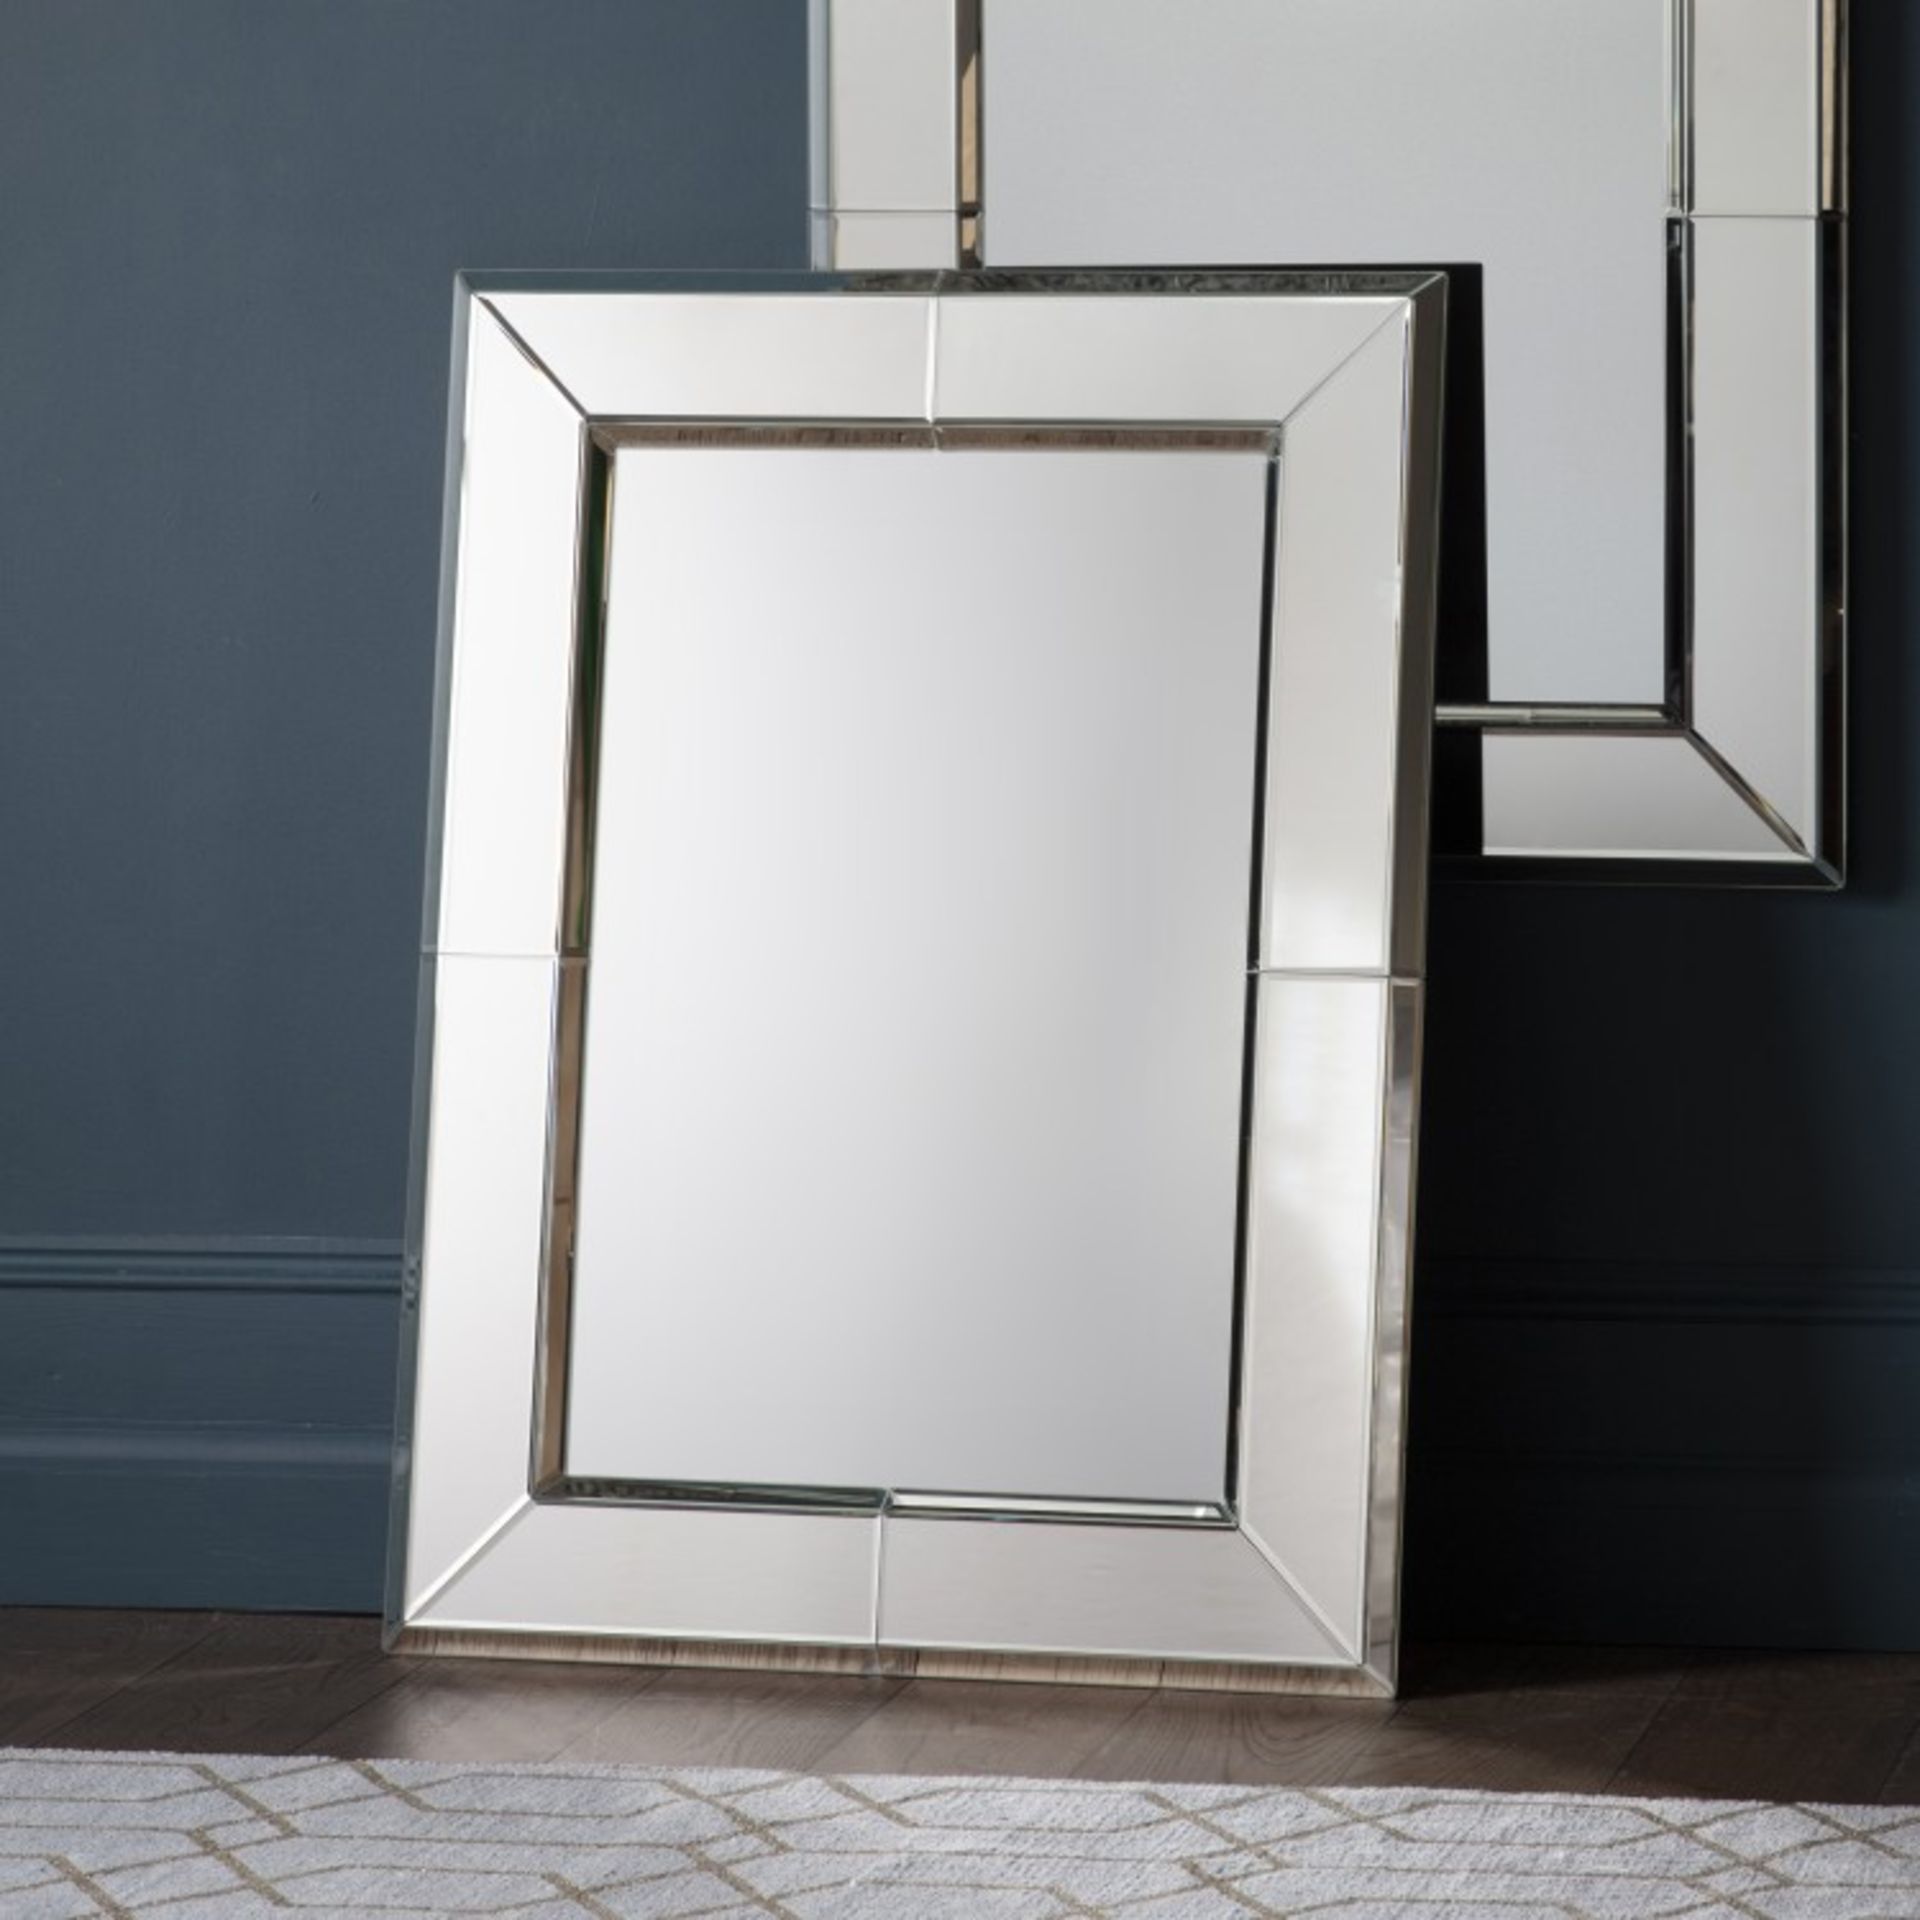 Vienna Rectangle Mirror 800 x 1060mm The Vienna Rectangle Mirror Is A Must-Have For The Contemporary